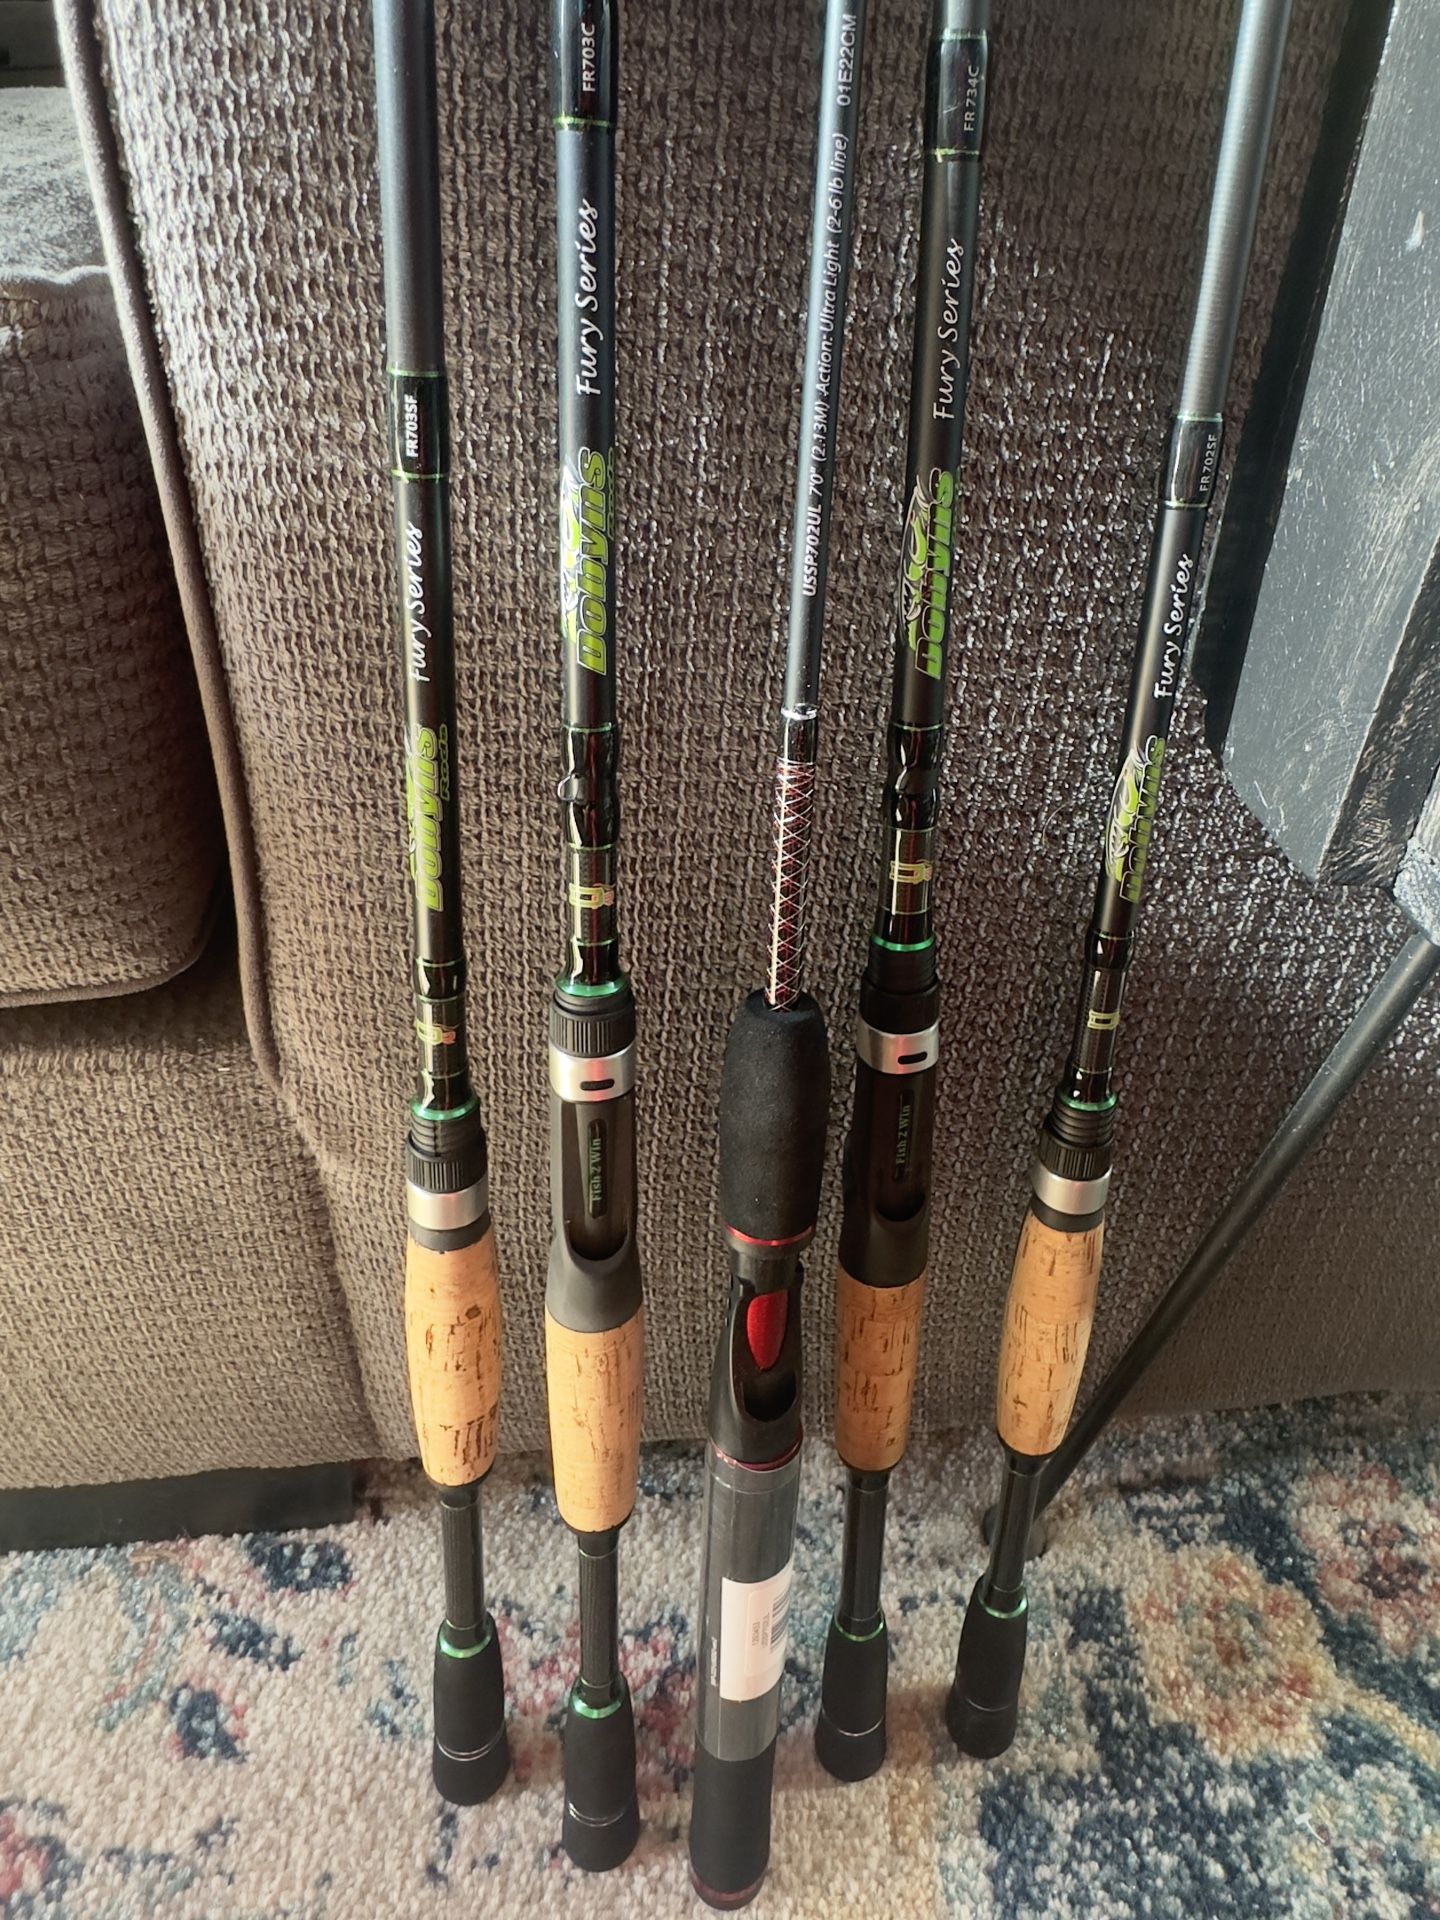 Fishing Rods for Sale Casting/Spinning Dobyns Fury and Uglystik